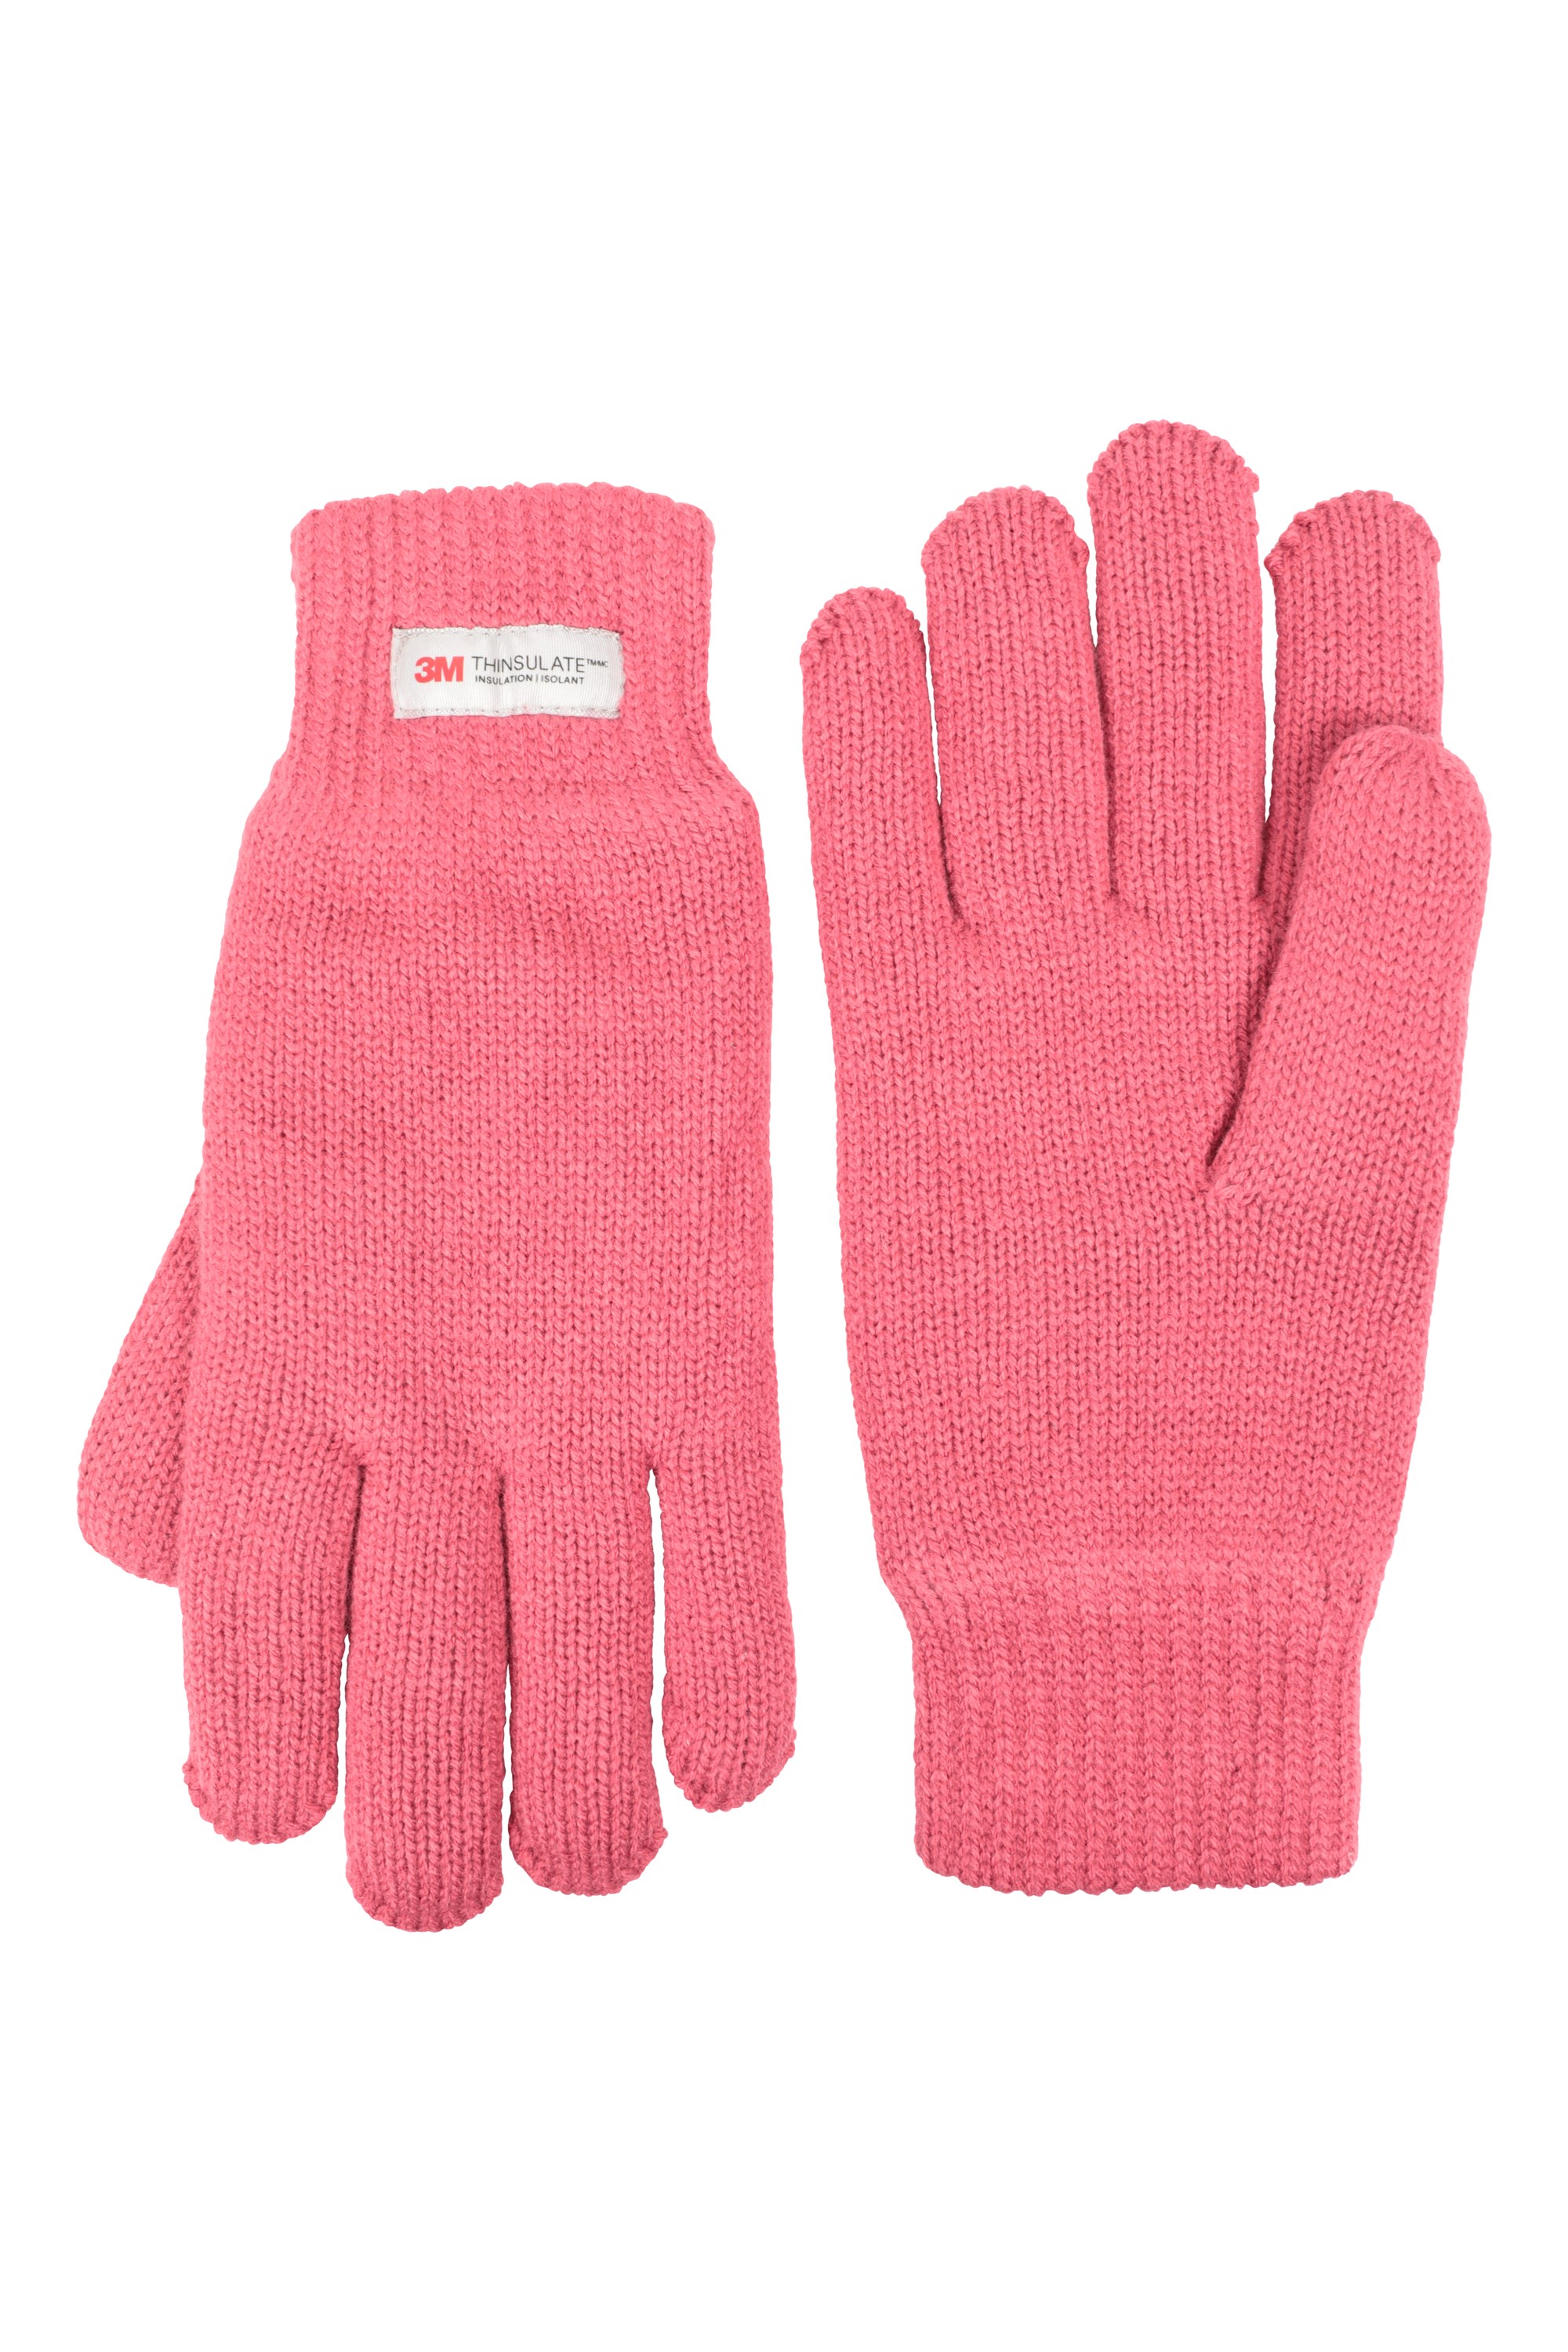 Thinsulate Womens Knitted Gloves - Pink